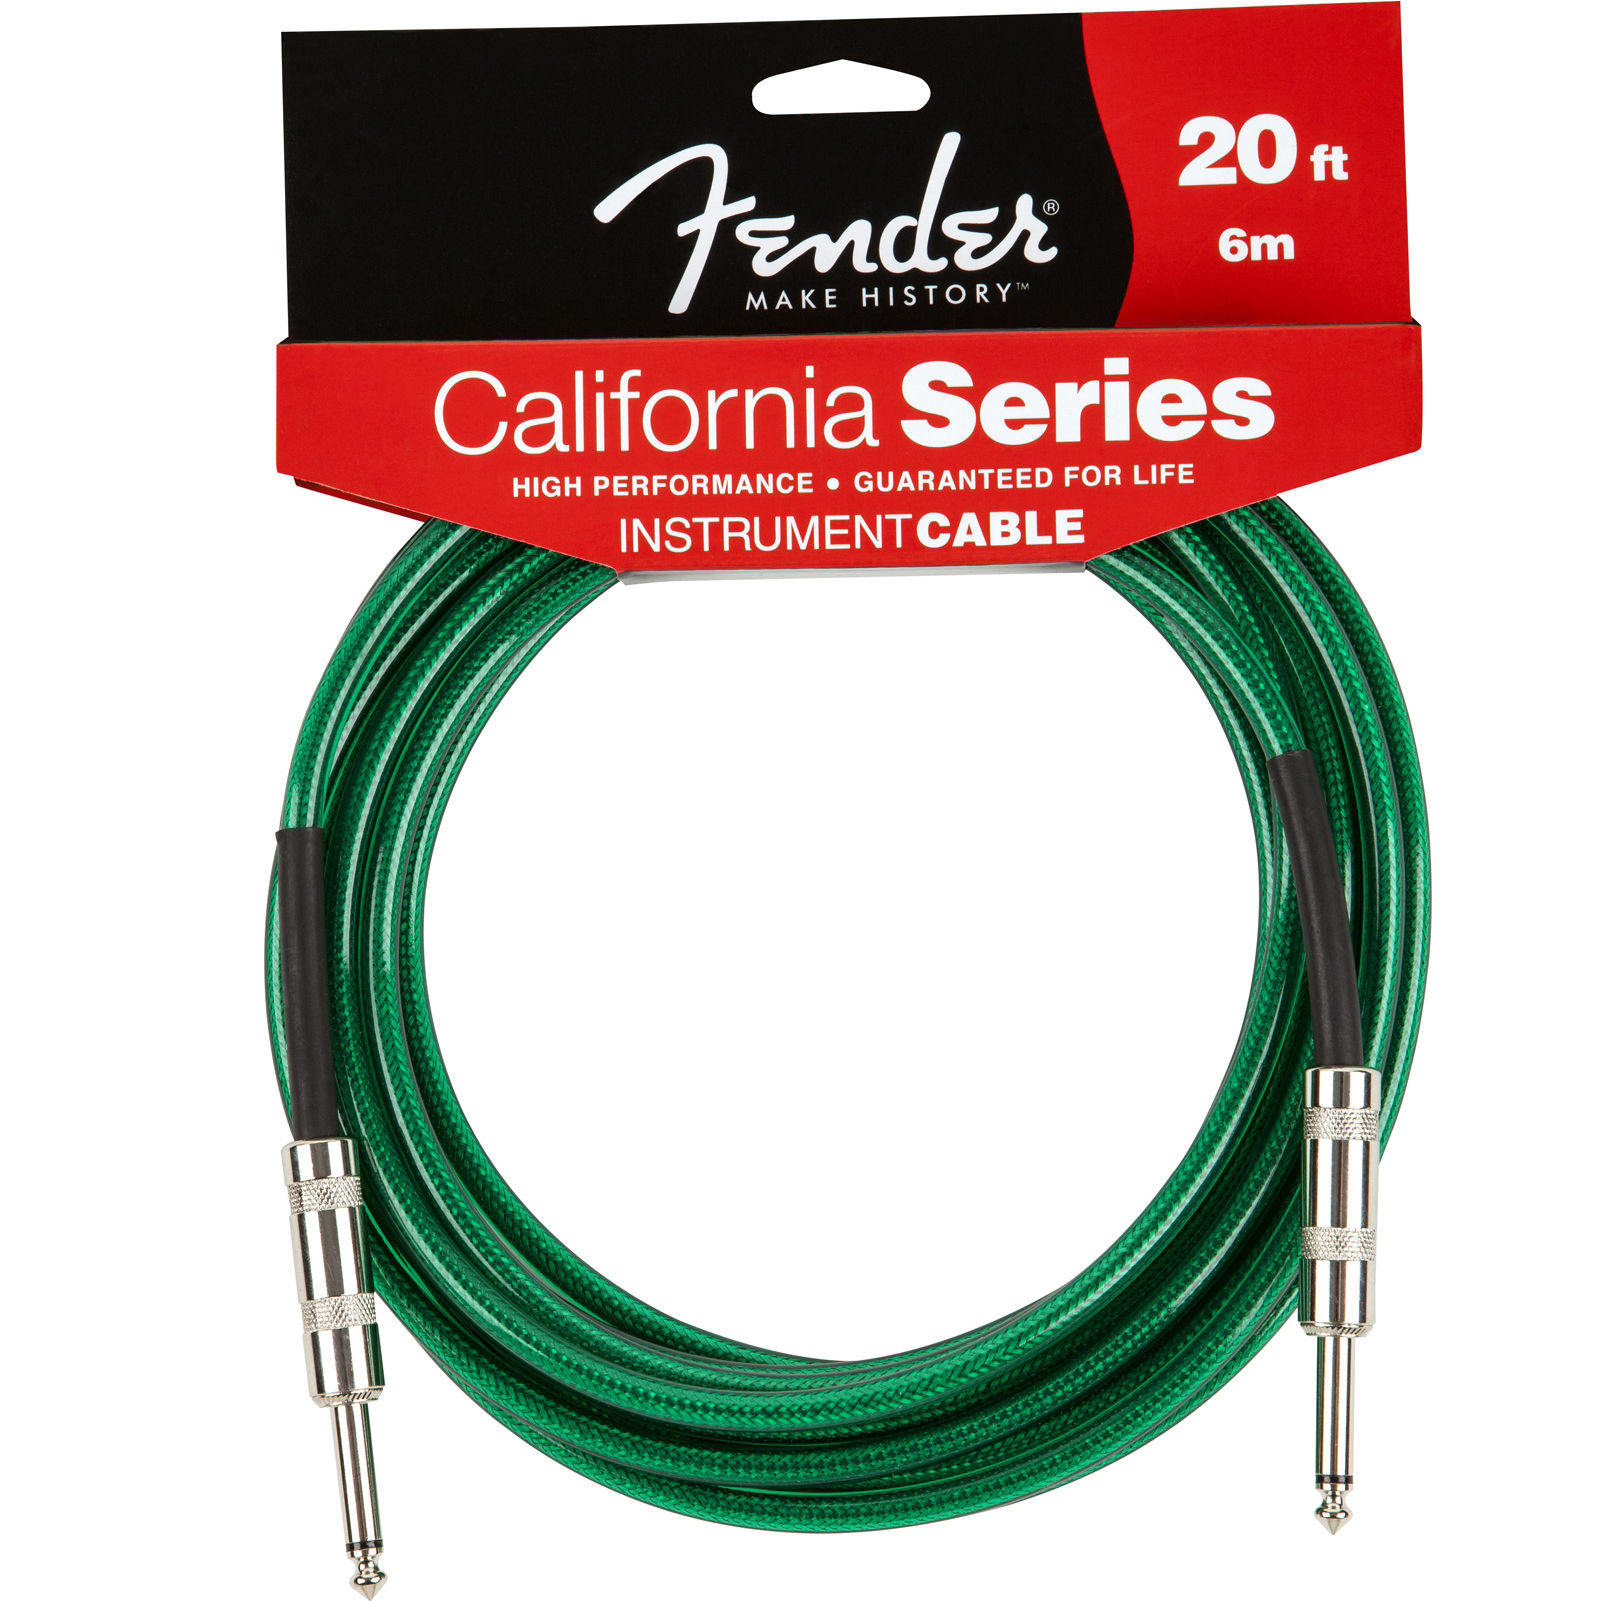 Fender California Series Cable 6m Green | Obrázok 1 | eplay.sk